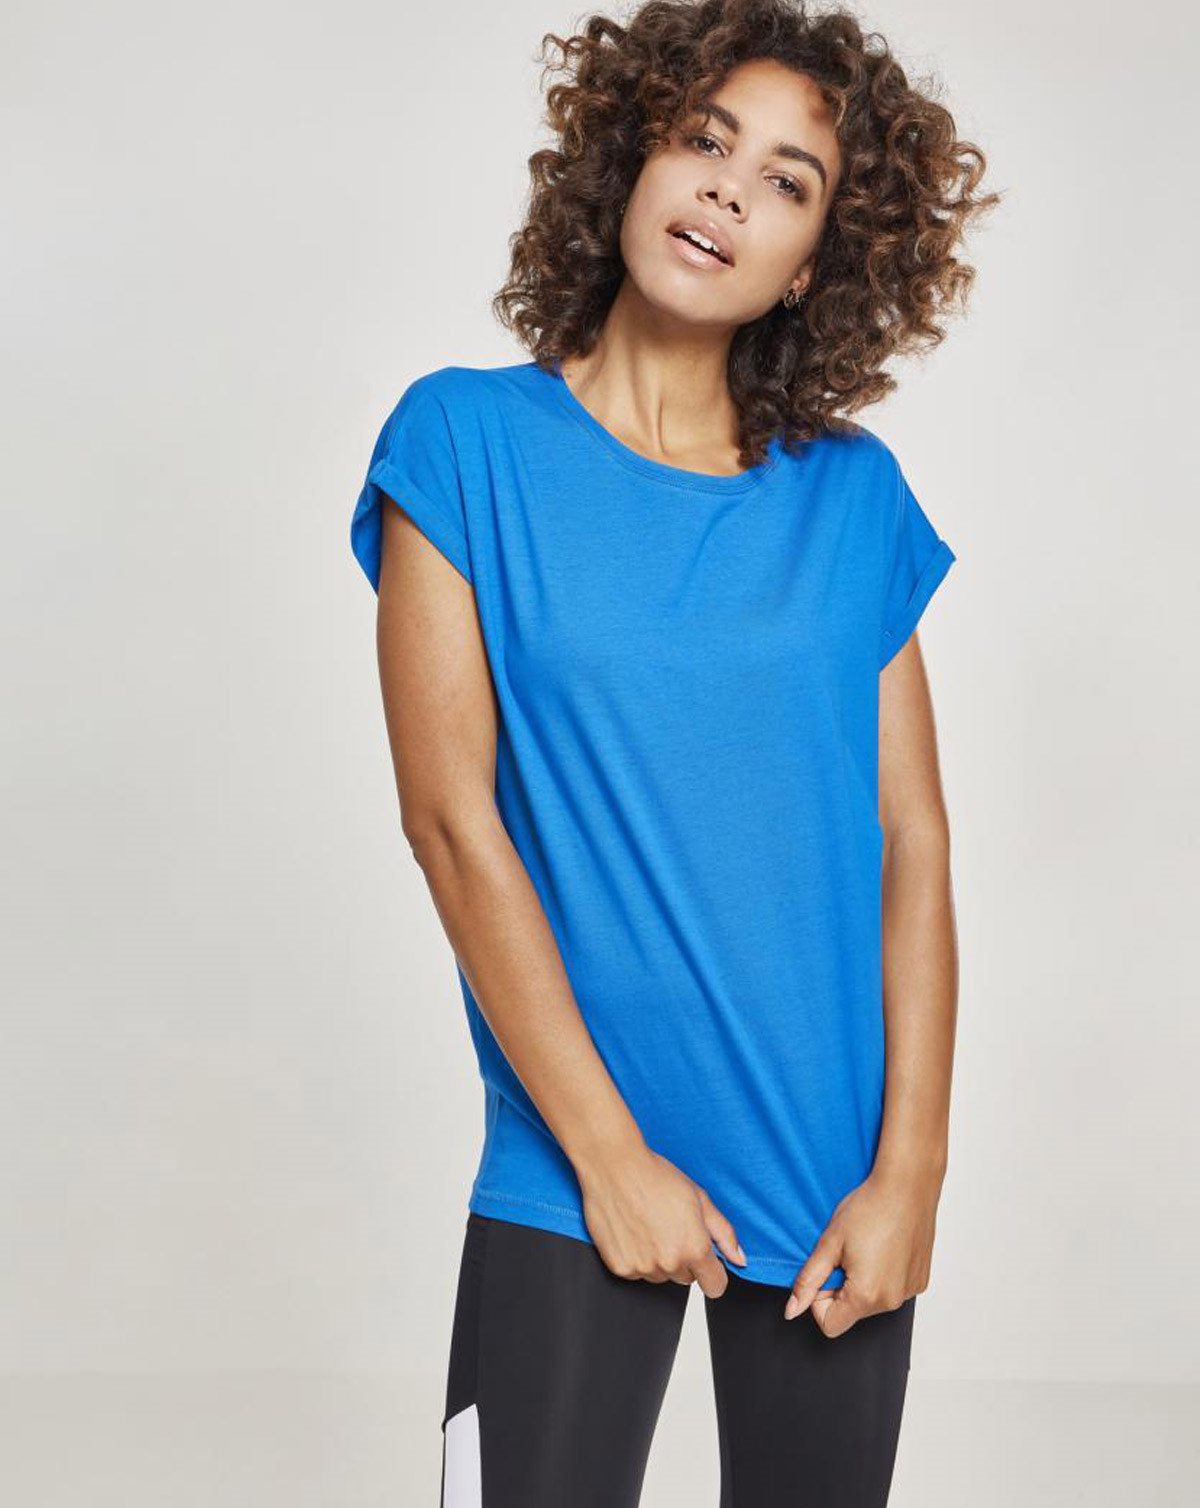 Urban Classics Ladies Extended Shoulder Tee (Bright Blue, XS)